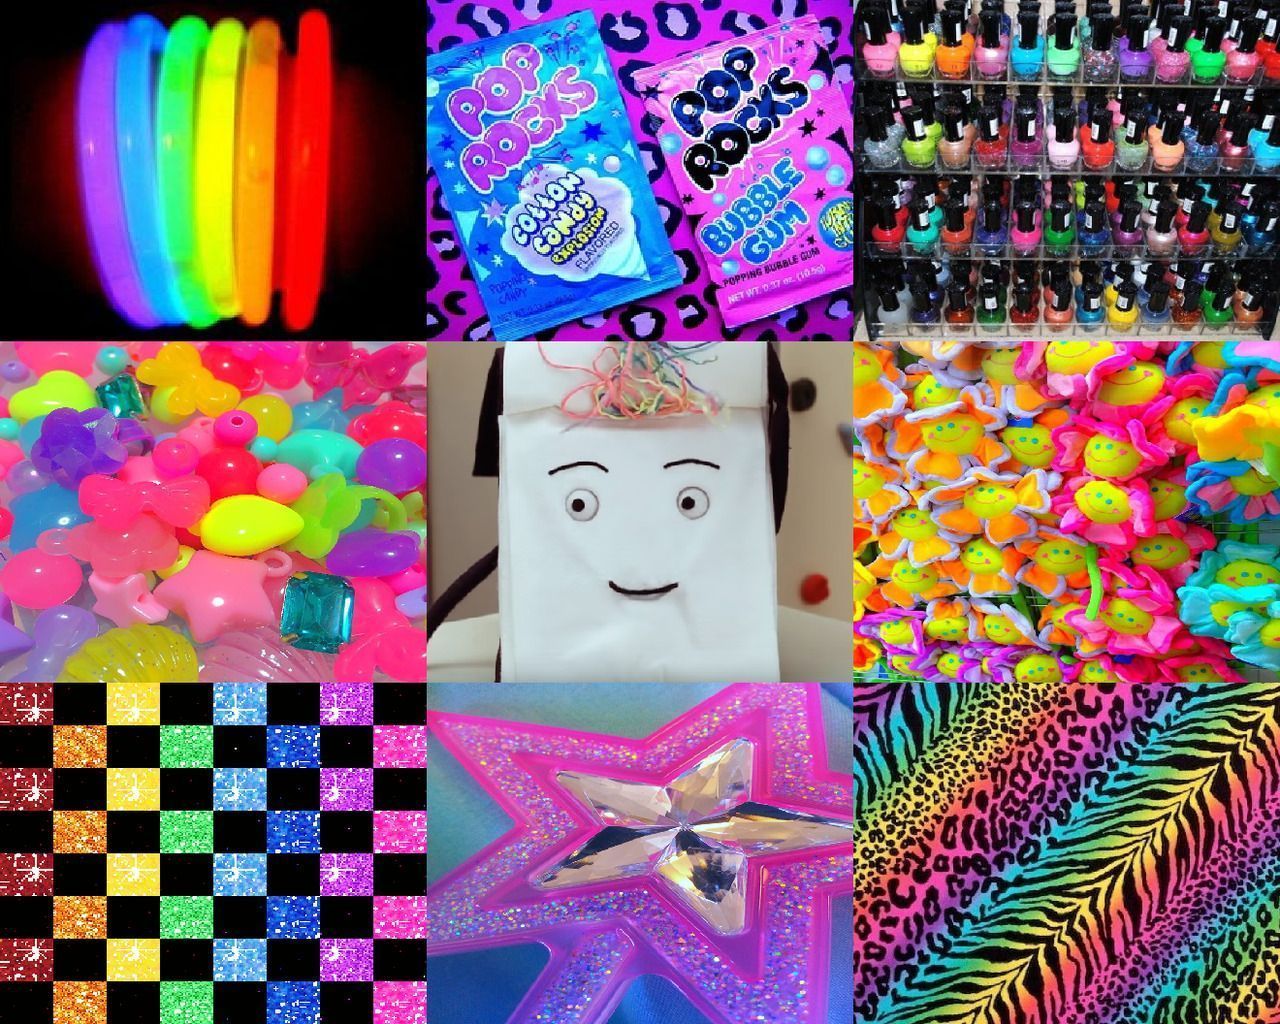 A collage of 9 different images of neon items including glow sticks, nail polish, and a face mask. - Scenecore